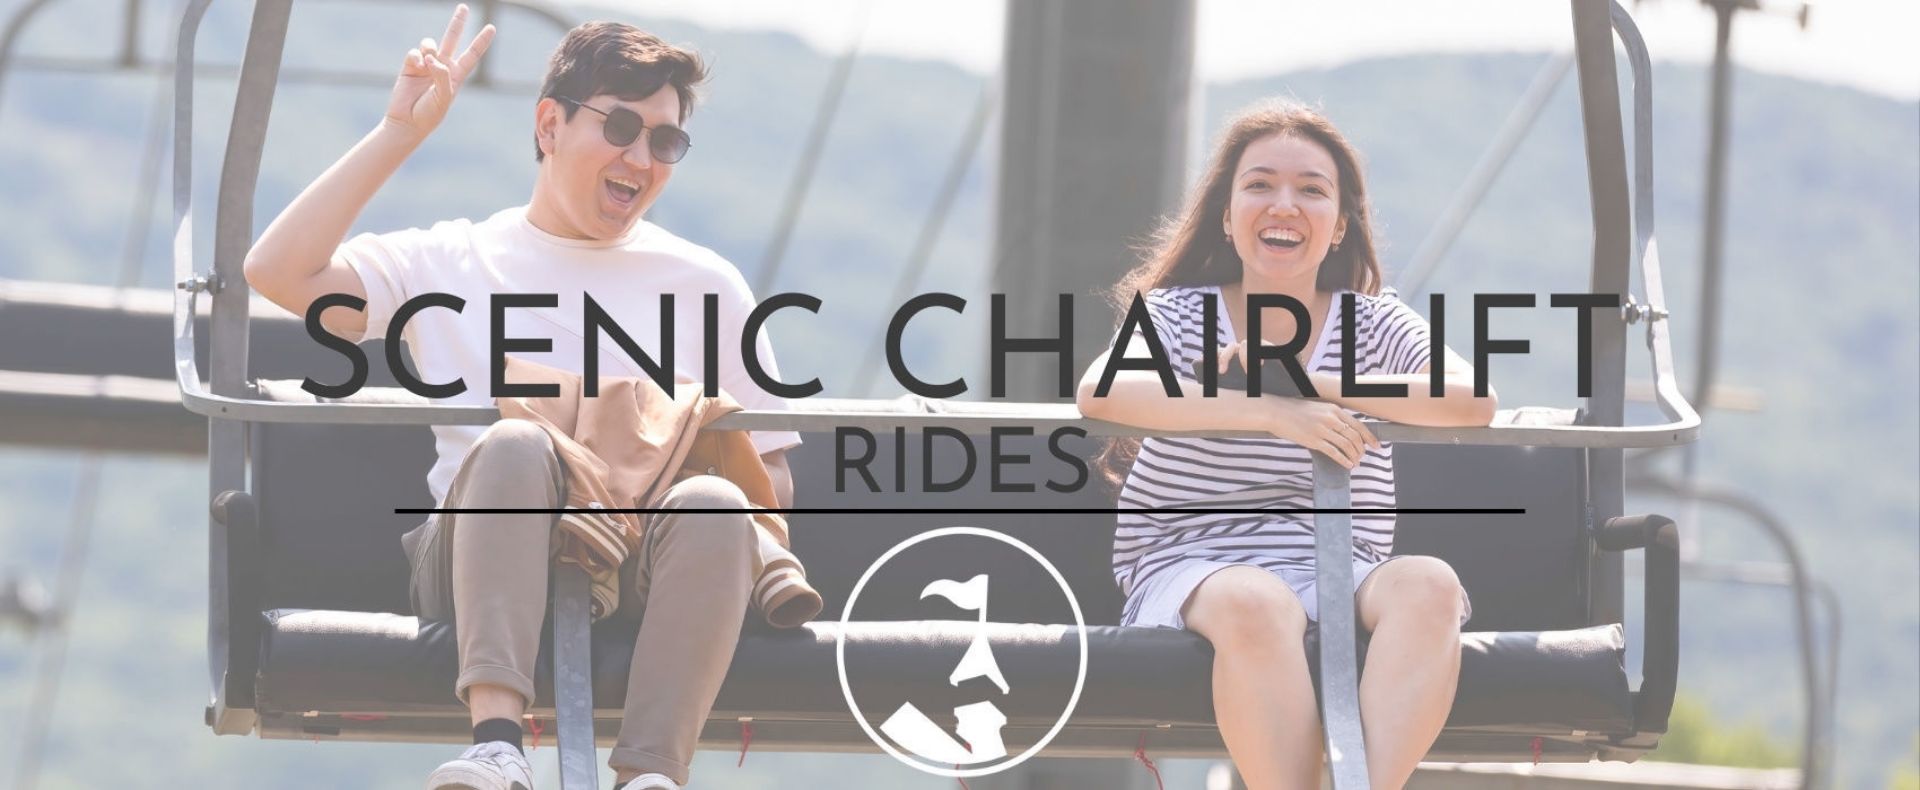 Scenic Chairlift Rides at The Highlands	